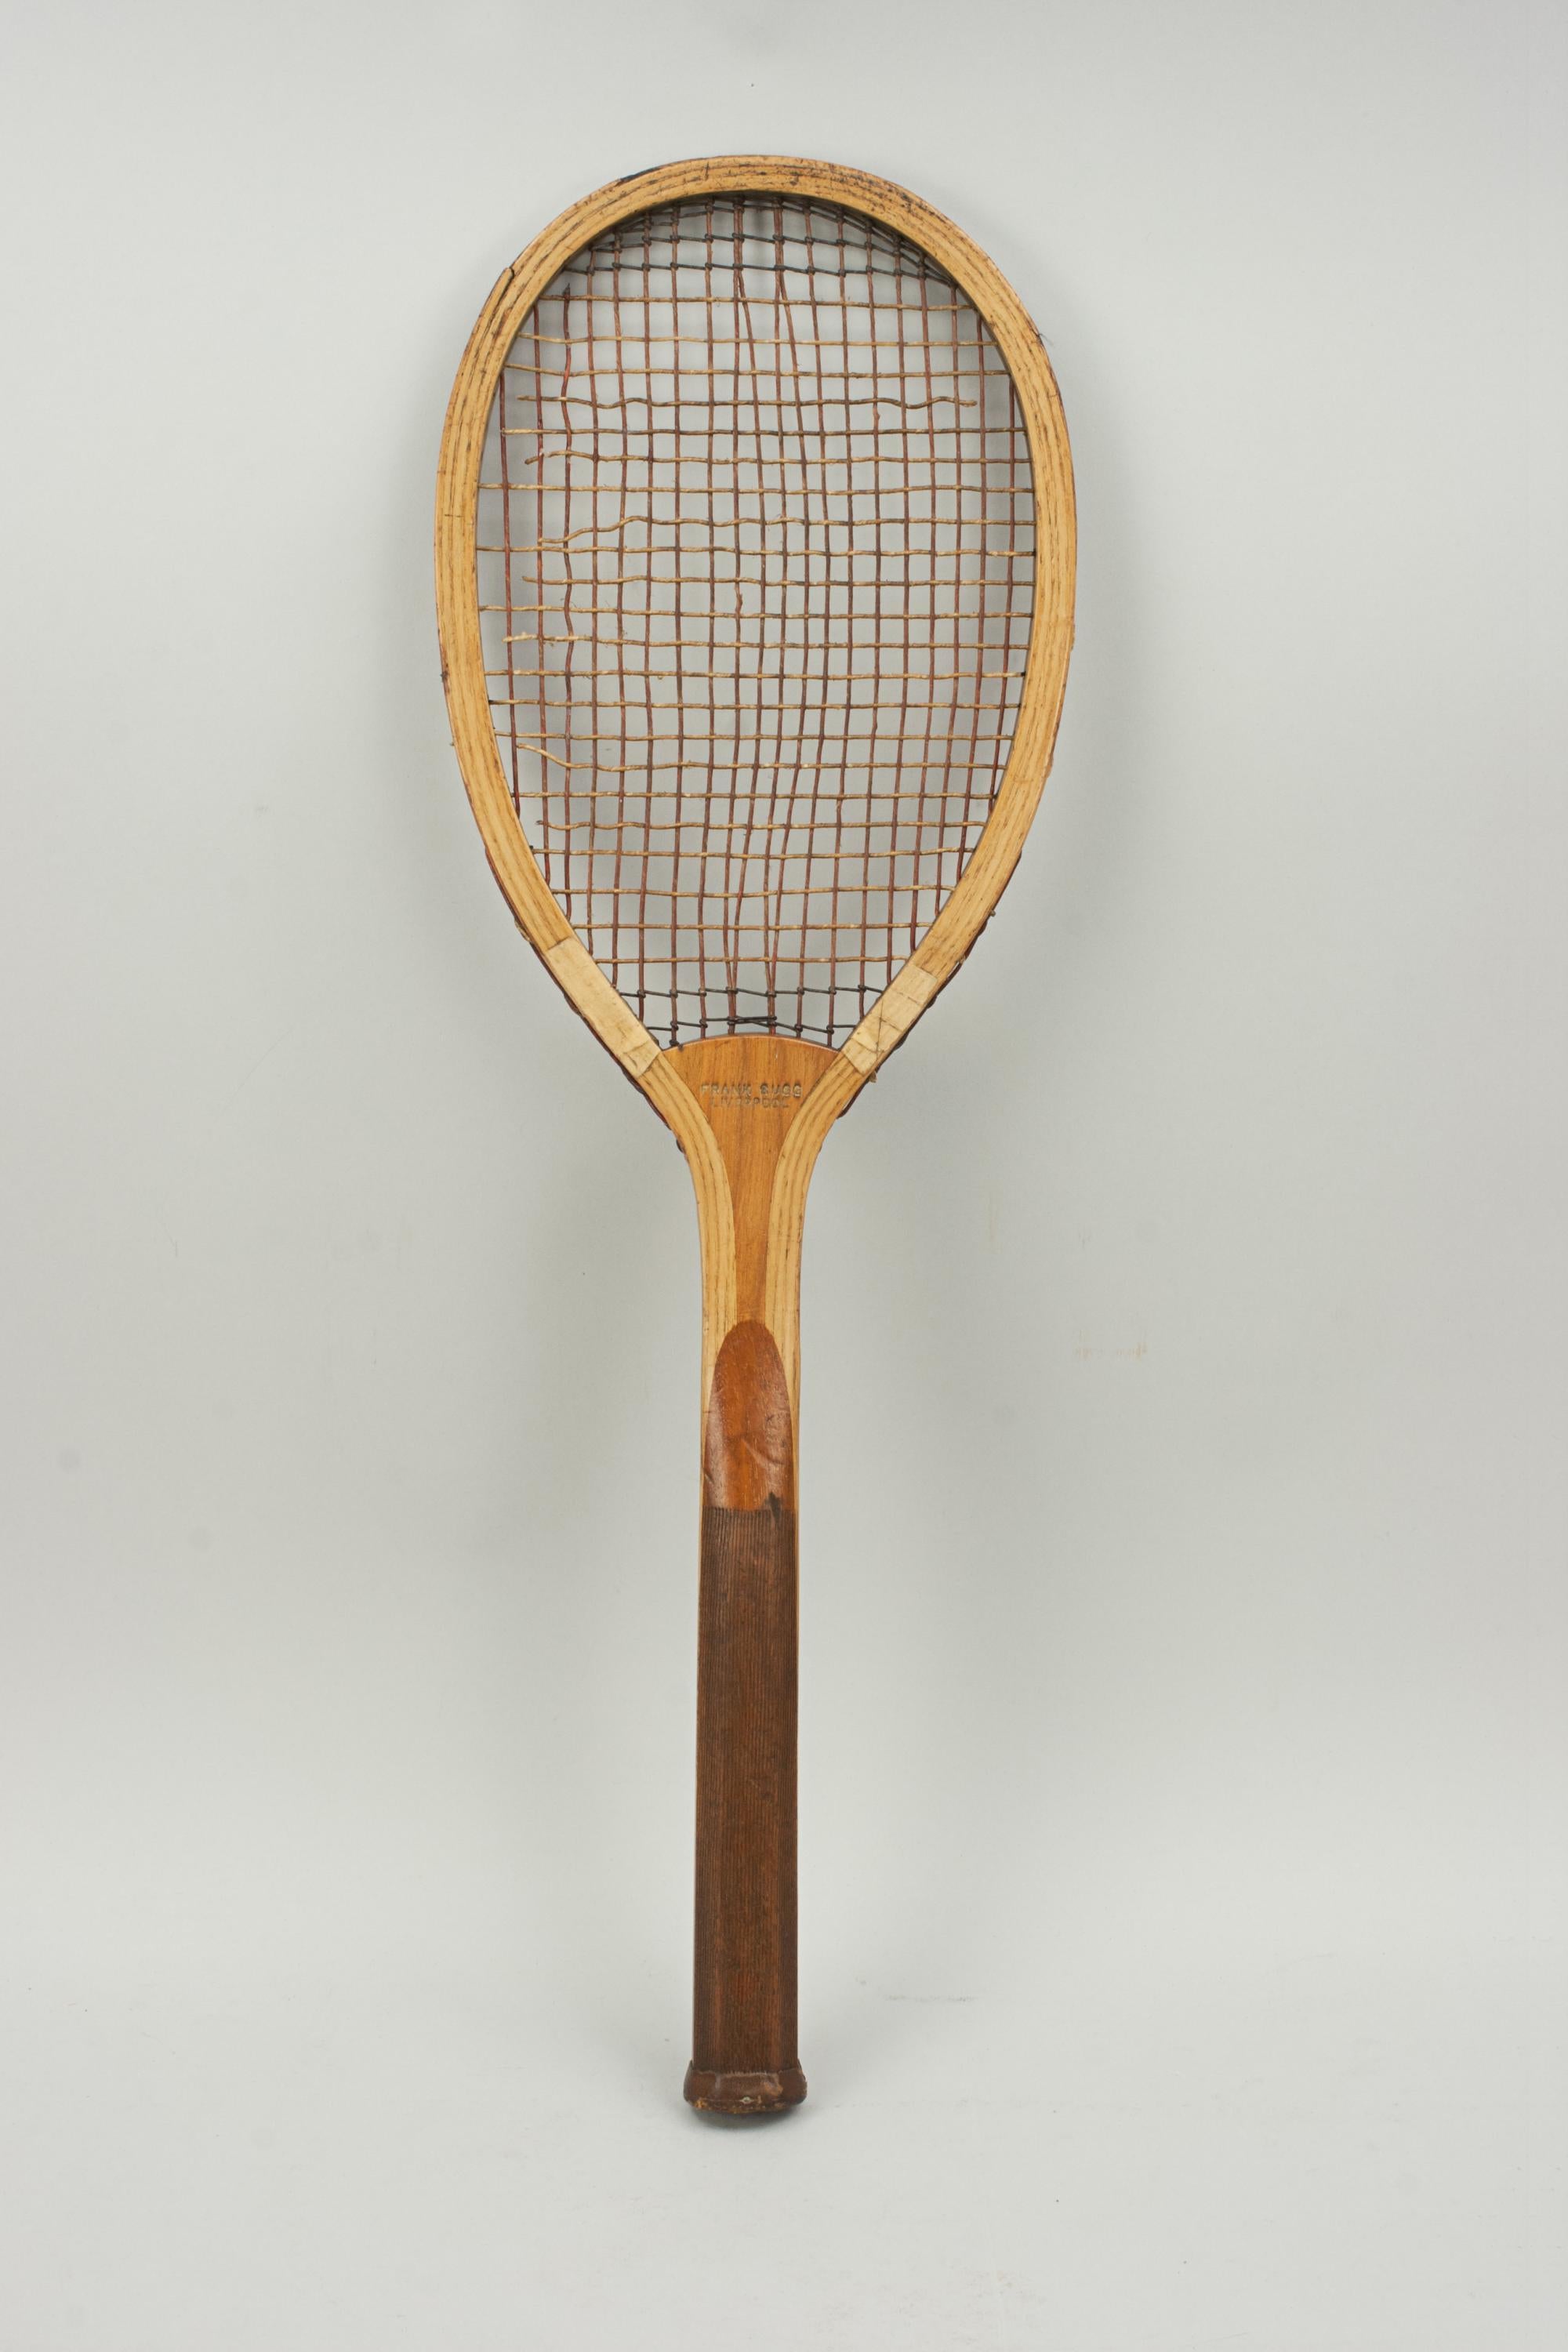 Wooden Lawn Tennis Racket, Frank Sugg, Liverpool.
A fine example of a wooden framed lawn tennis racket by Frank Sugg Ltd., Liverpool. A nice ash framed racket with convex wedge. The walnut wedge is embossed in gilt 'Frank Sugg, Liverpool' on one